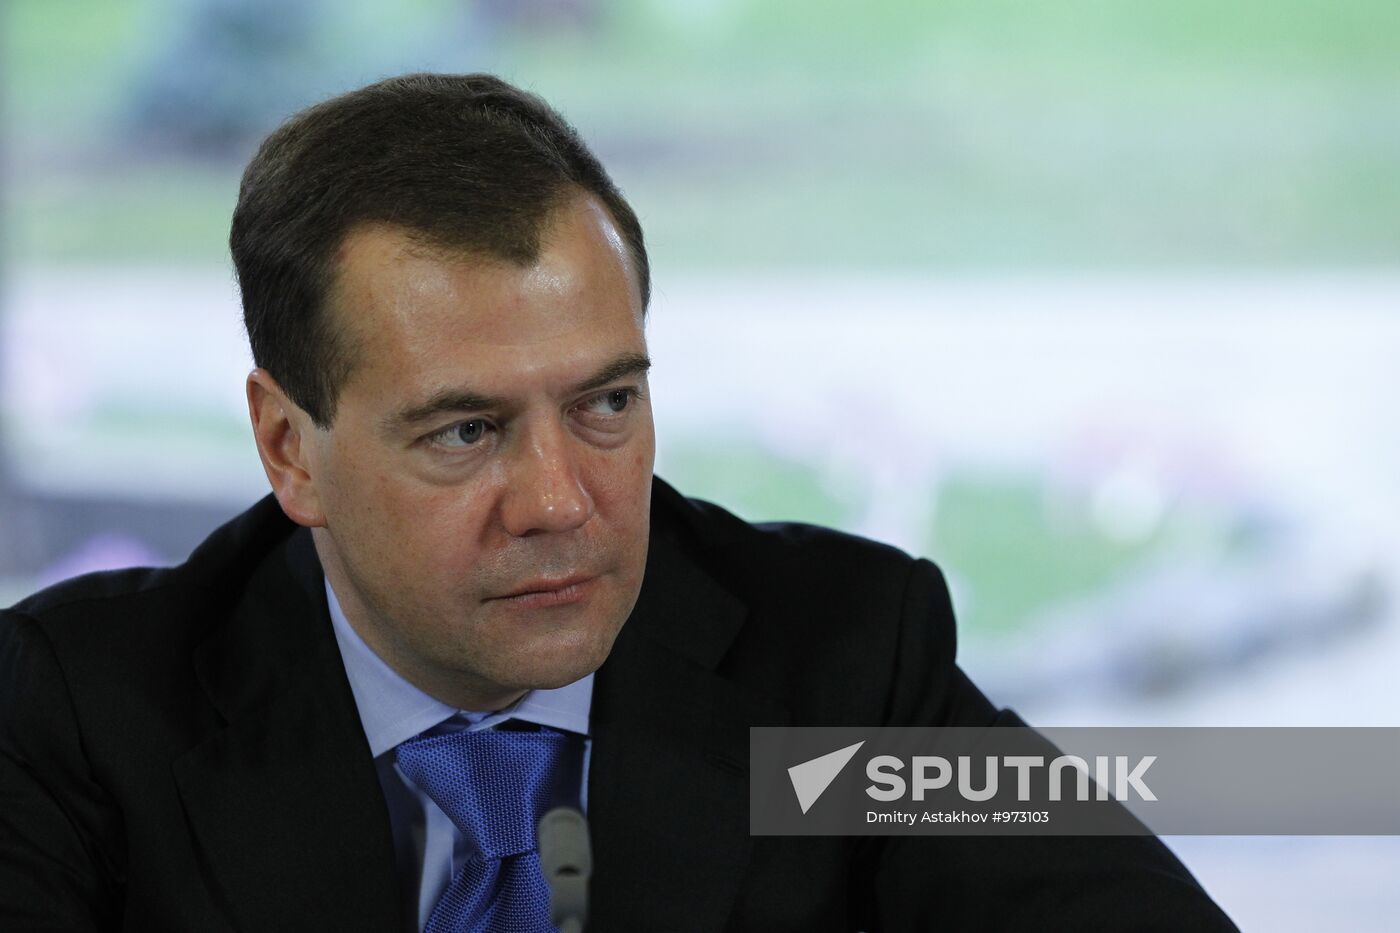 Dmitry Medvedev meets with farmers at Gorki residence